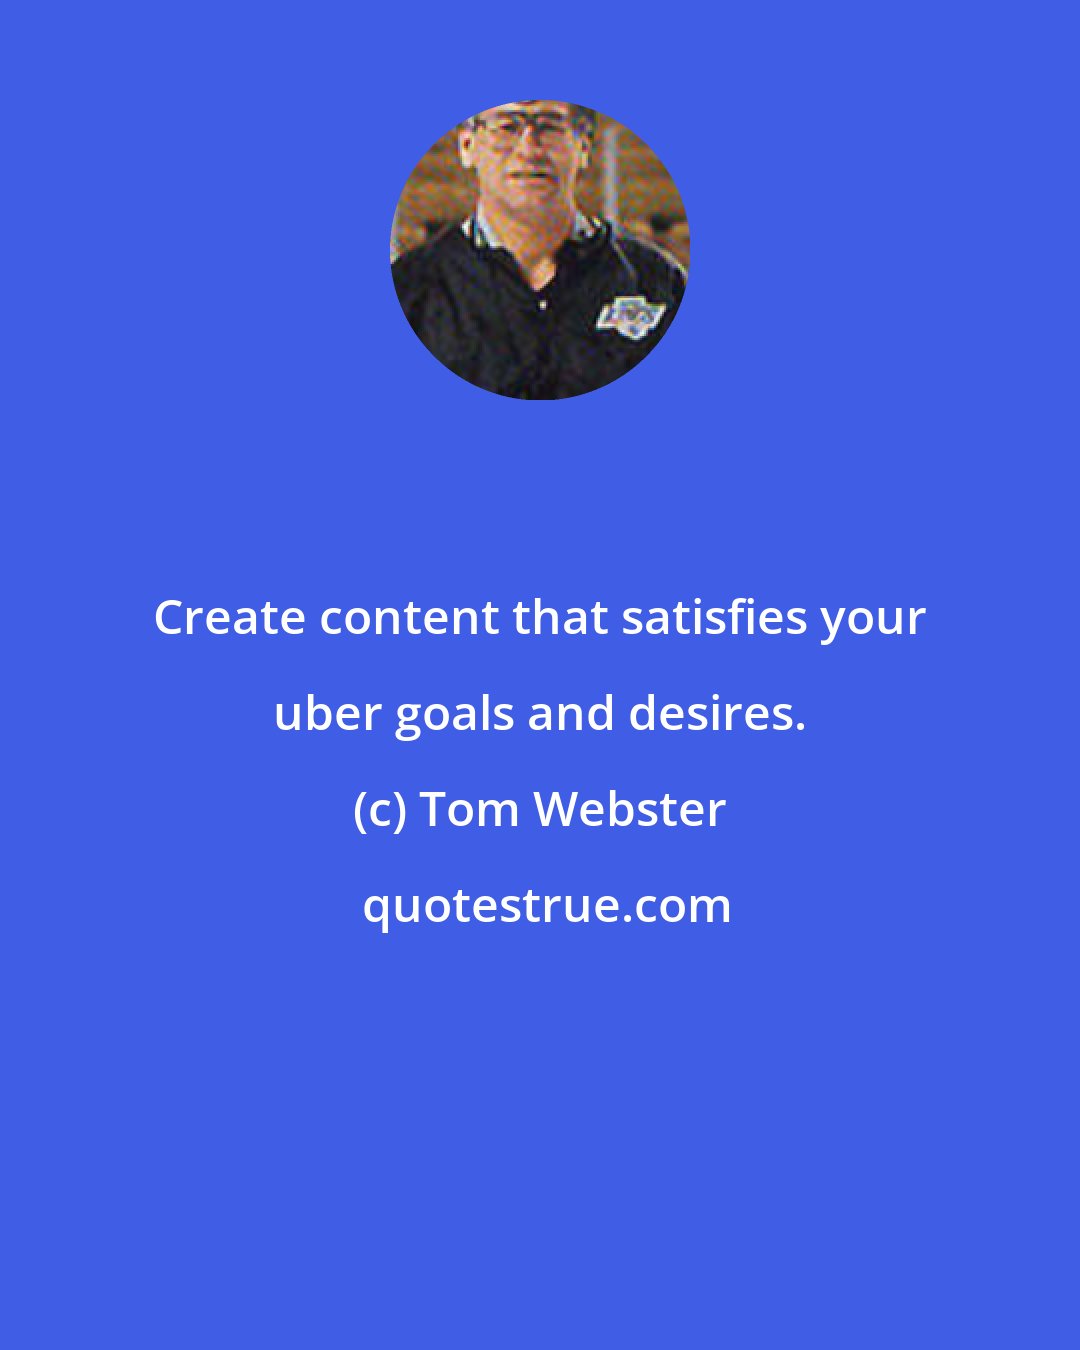 Tom Webster: Create content that satisfies your uber goals and desires.